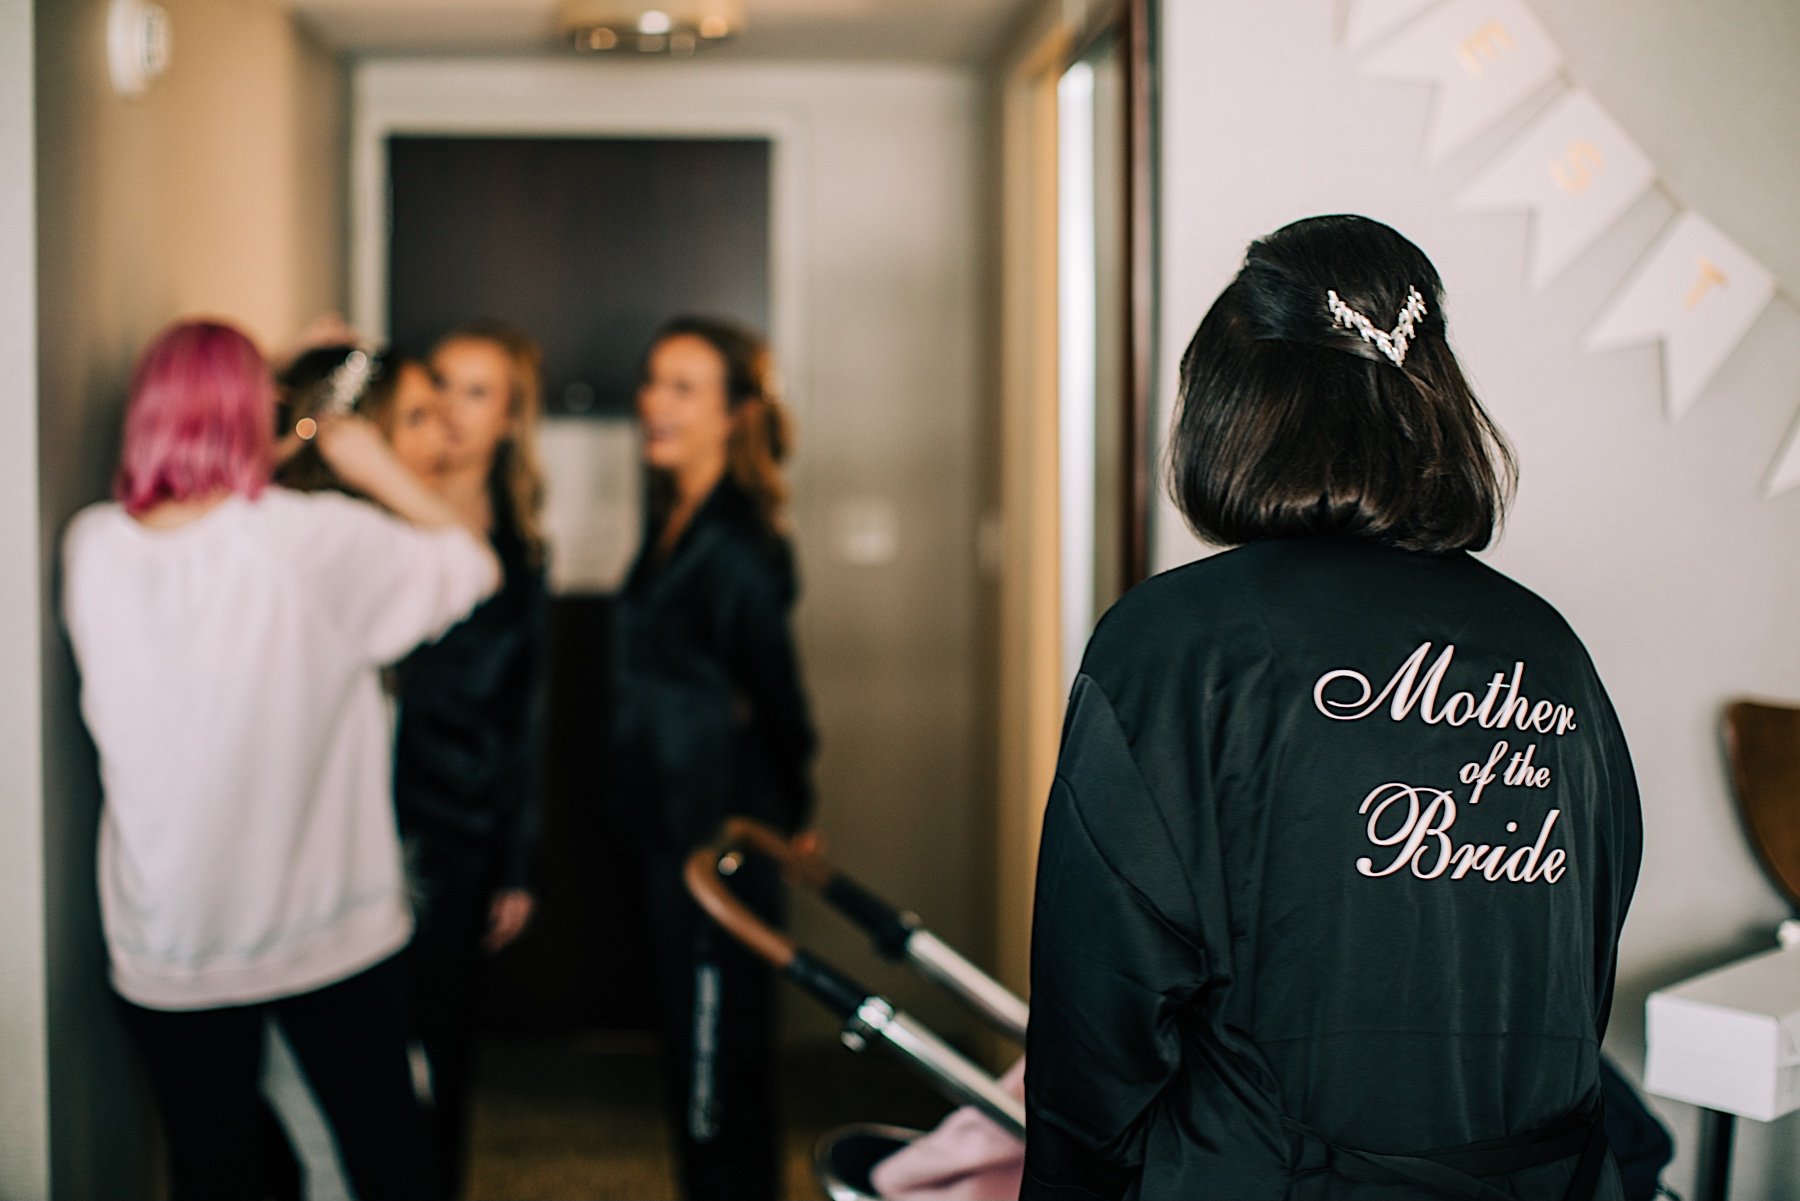 24_mother of the bride getting ready photos westin jersey city wedding.jpg